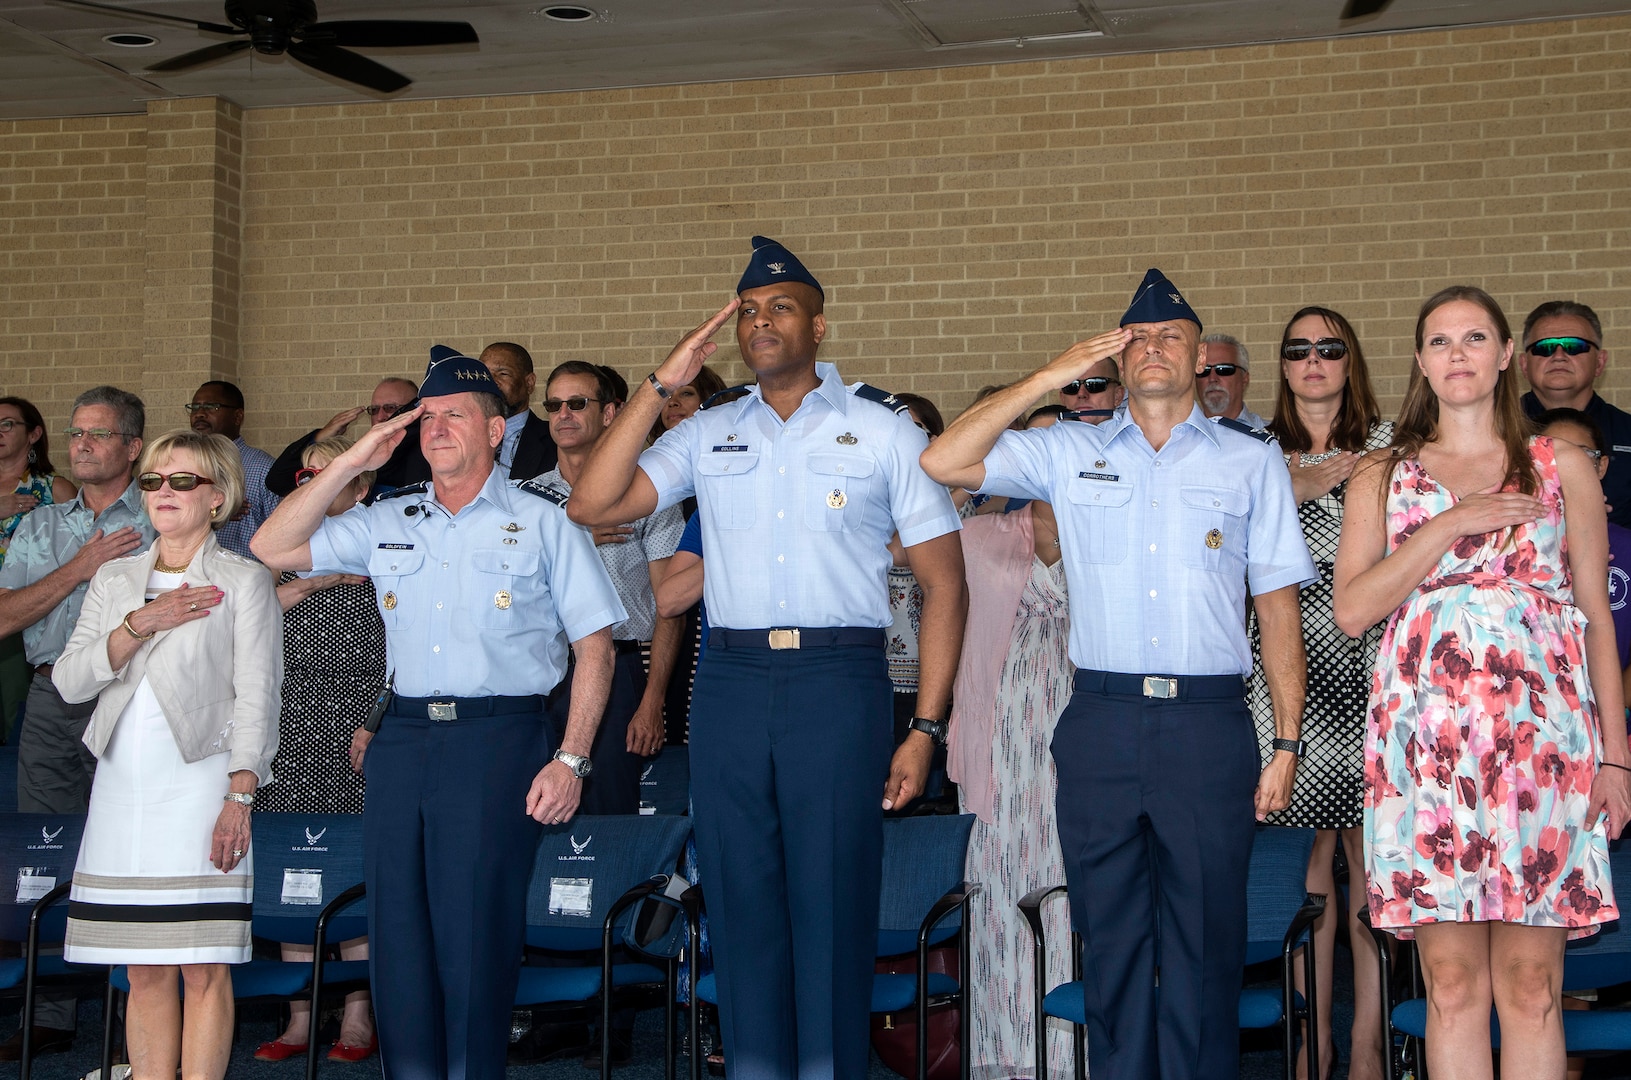 Air Force Chief of Staff Gen. David Goldfein, salutes during the playing of the national anthem as part of a basic military training graduation June 16, 2017, at Joint Base San Antonio-Lackland. Goldfein toured various JBSA-Lackland facilities and met many 37th Training Wing Airmen during his two-day visit. Every enlisted Airmen begins their Air Force career at basic military training. JBSA-Lackland is often referred to as the "Gateway to the Air Force," graduating about 39,000 Airmen annually. Basic military training is one of the missions of the 37th Training Wing, the largest training wing in the United States Air Force. (U.S. Air Force photo by Johnny Saldivar)